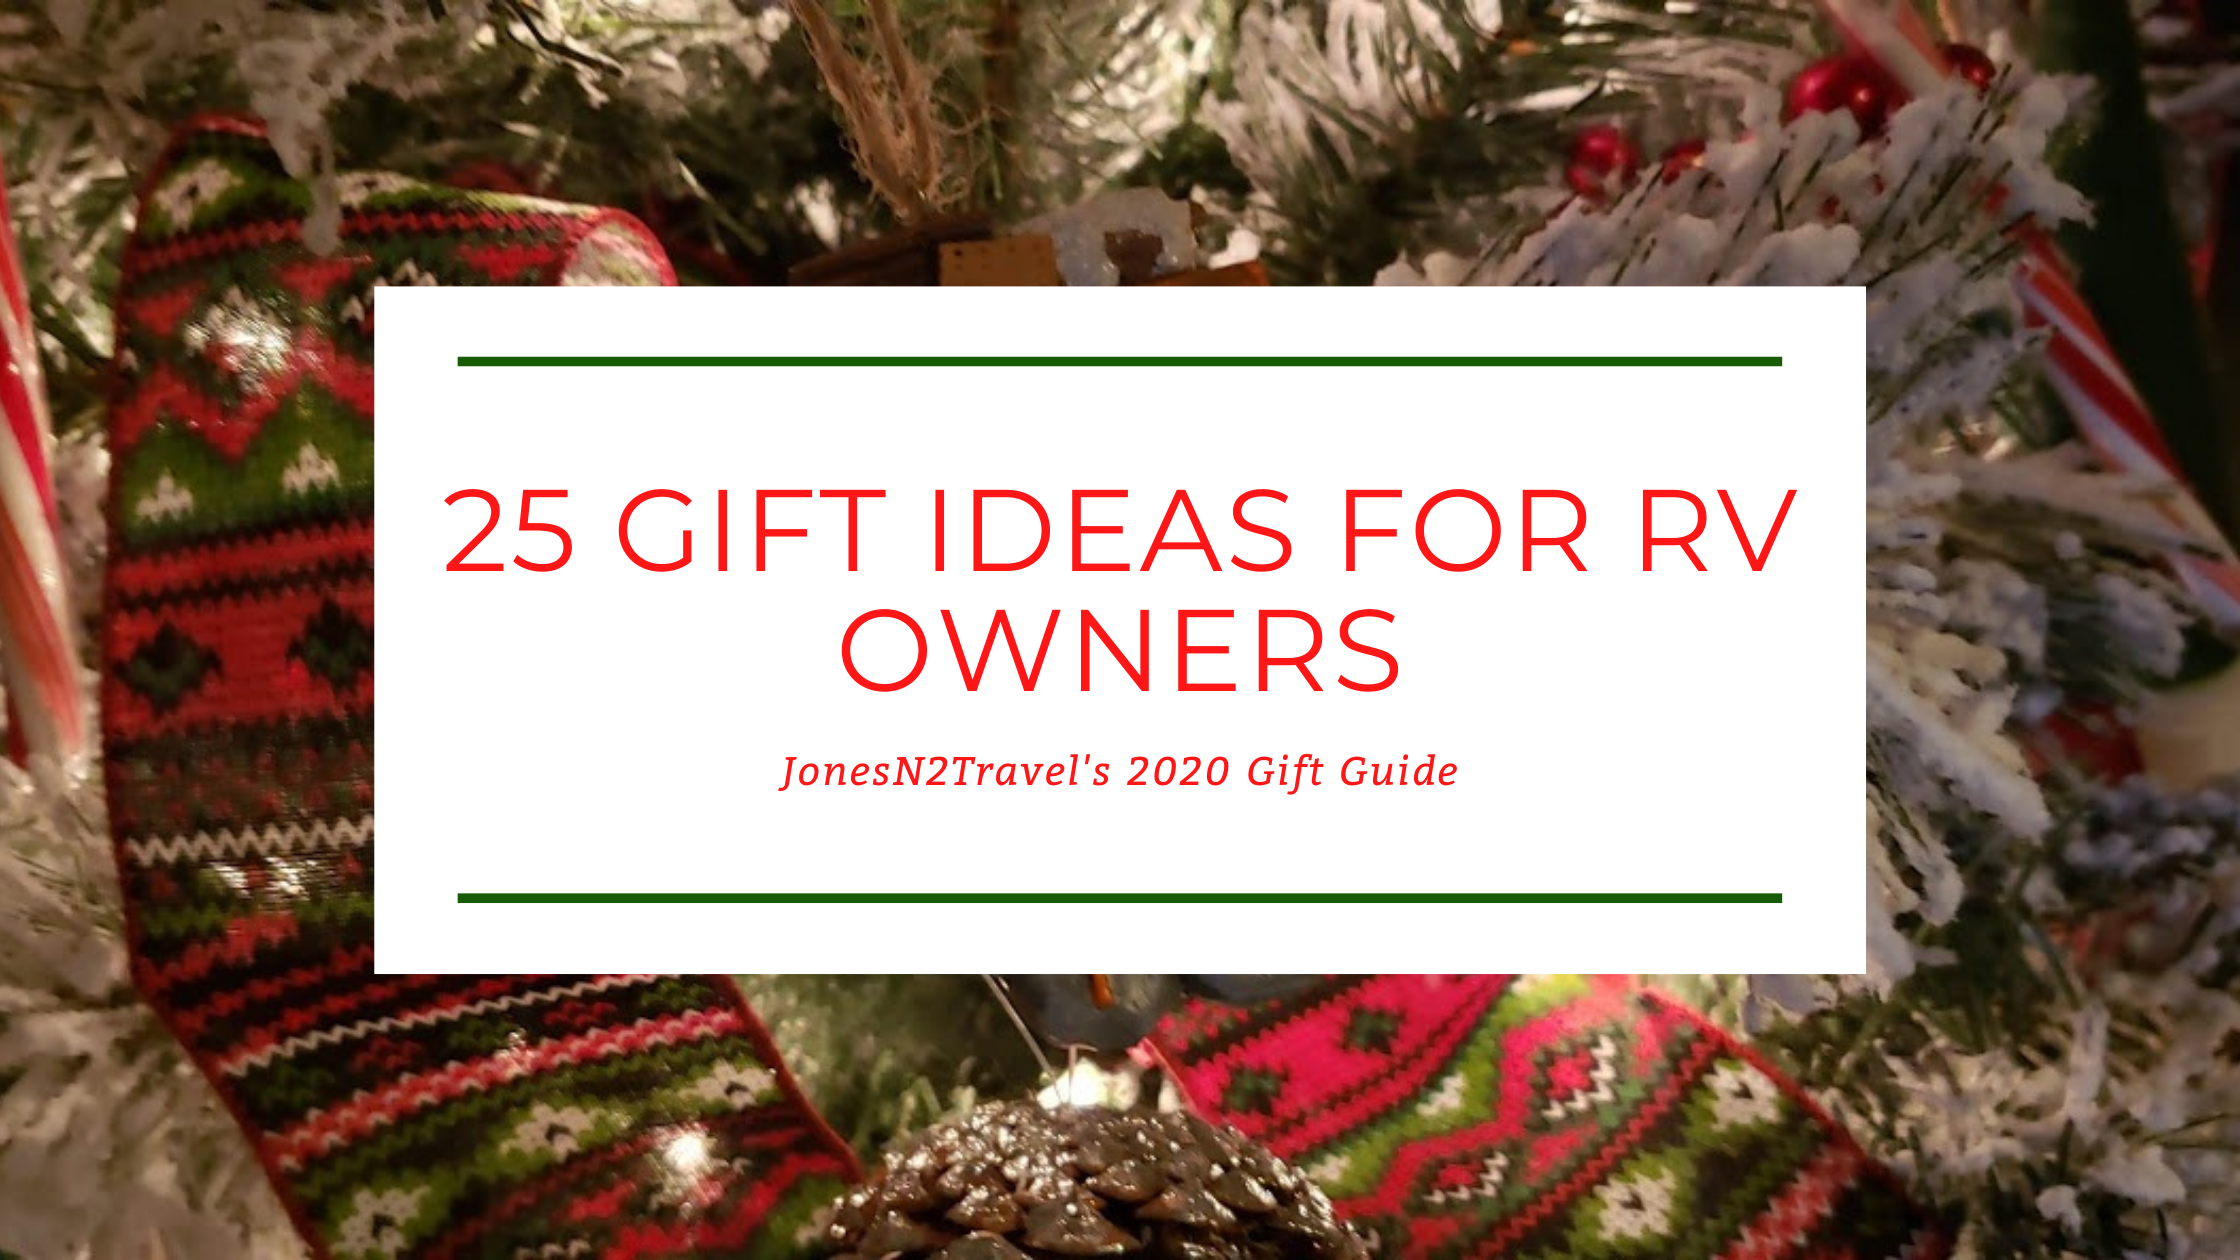 25 Gift Ideas for RV Owners - Our 2020 Gift Guide